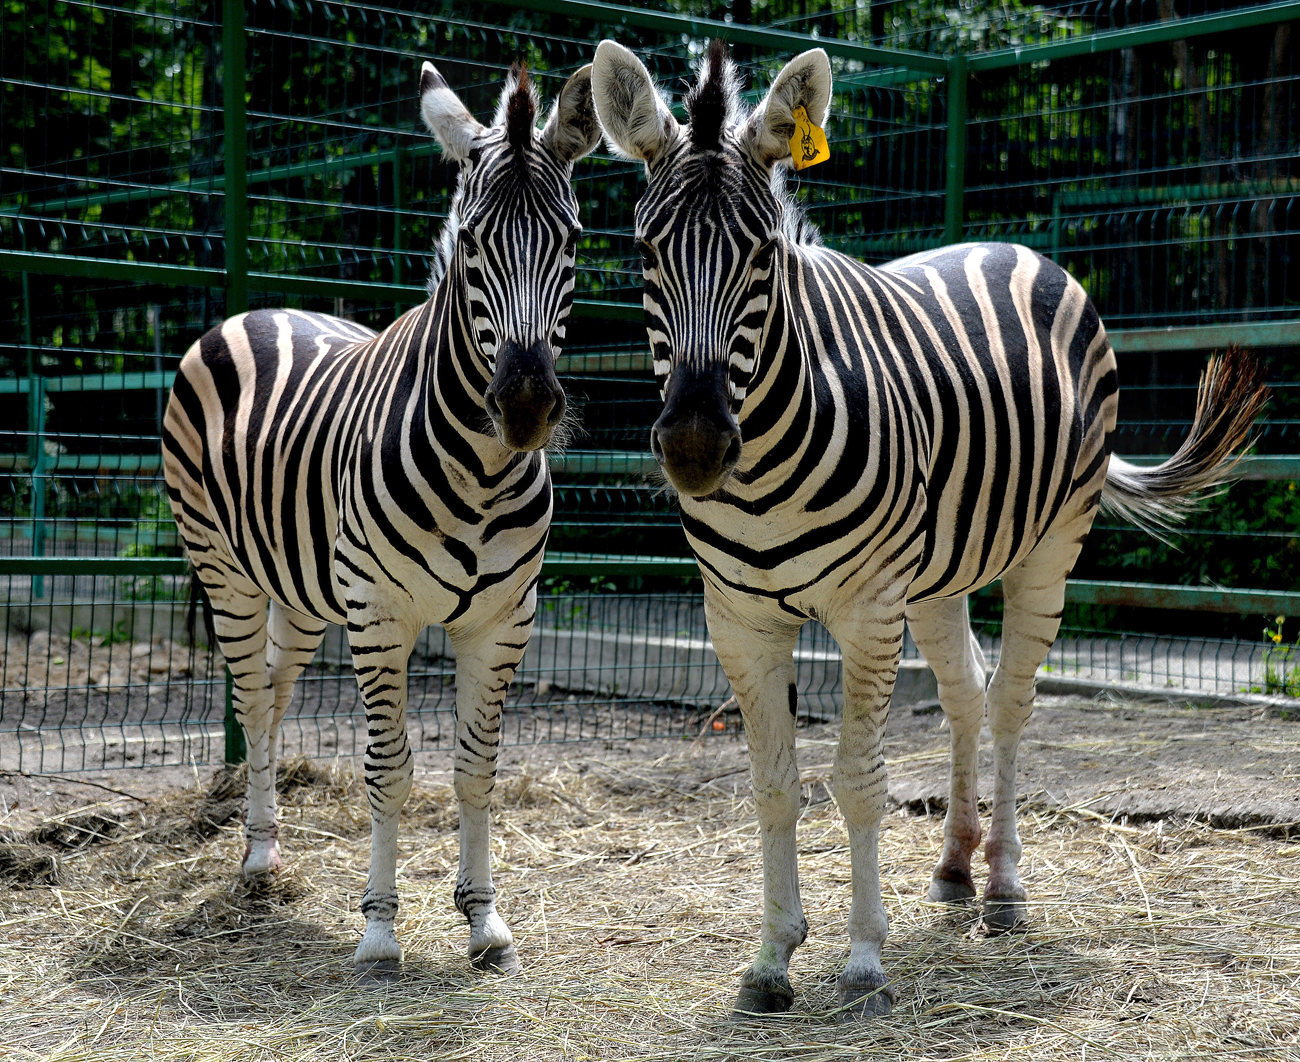 Young zebras Zoya and Zina that have been brought to Sadgorod private zoo in Vladivostok from the zoo in Stary Oskol